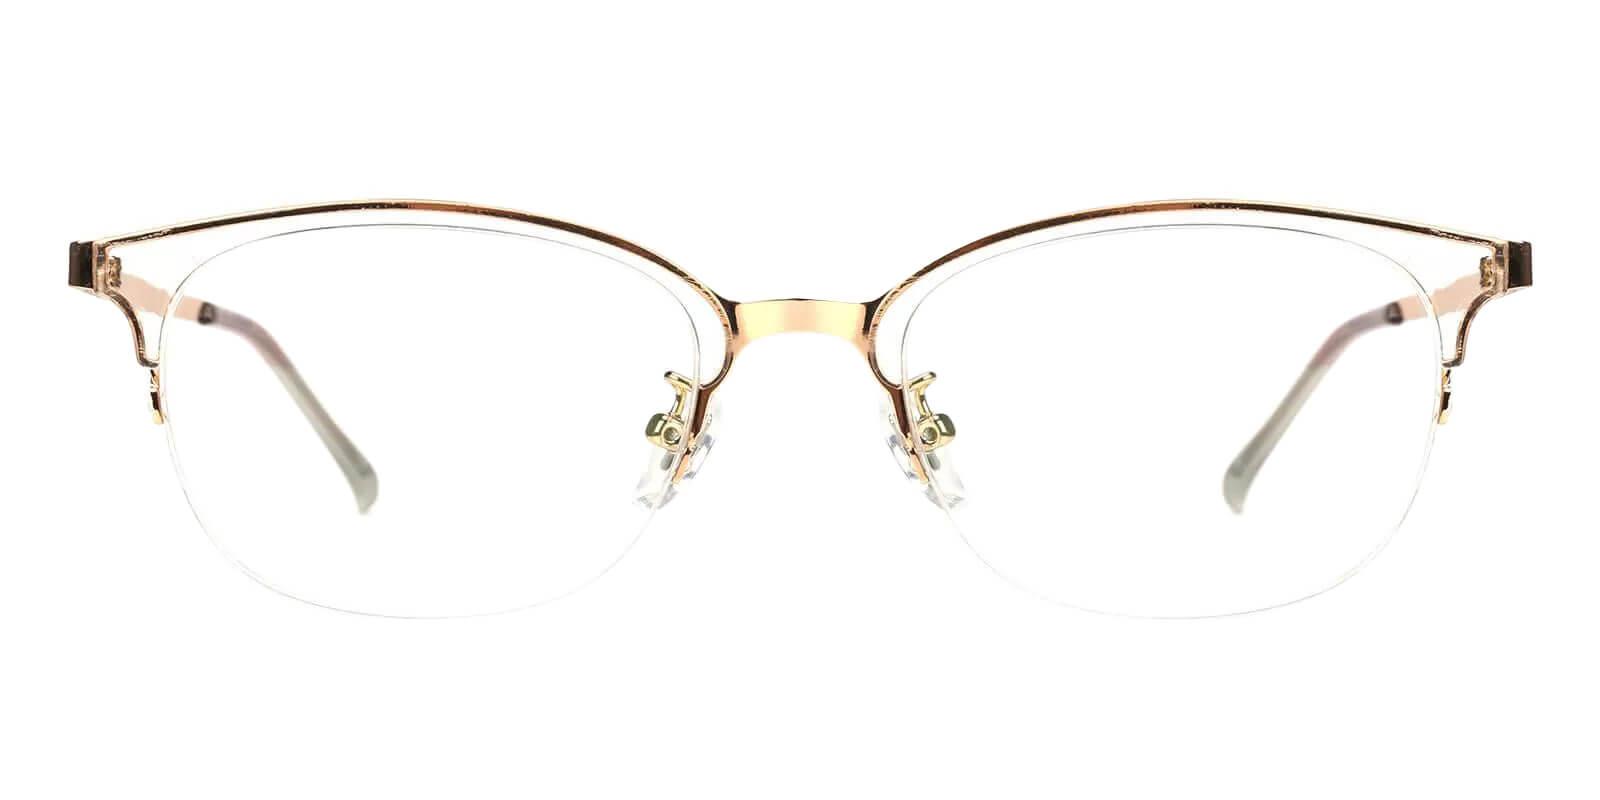 Polly Translucent Combination Eyeglasses , Fashion , NosePads Frames from ABBE Glasses